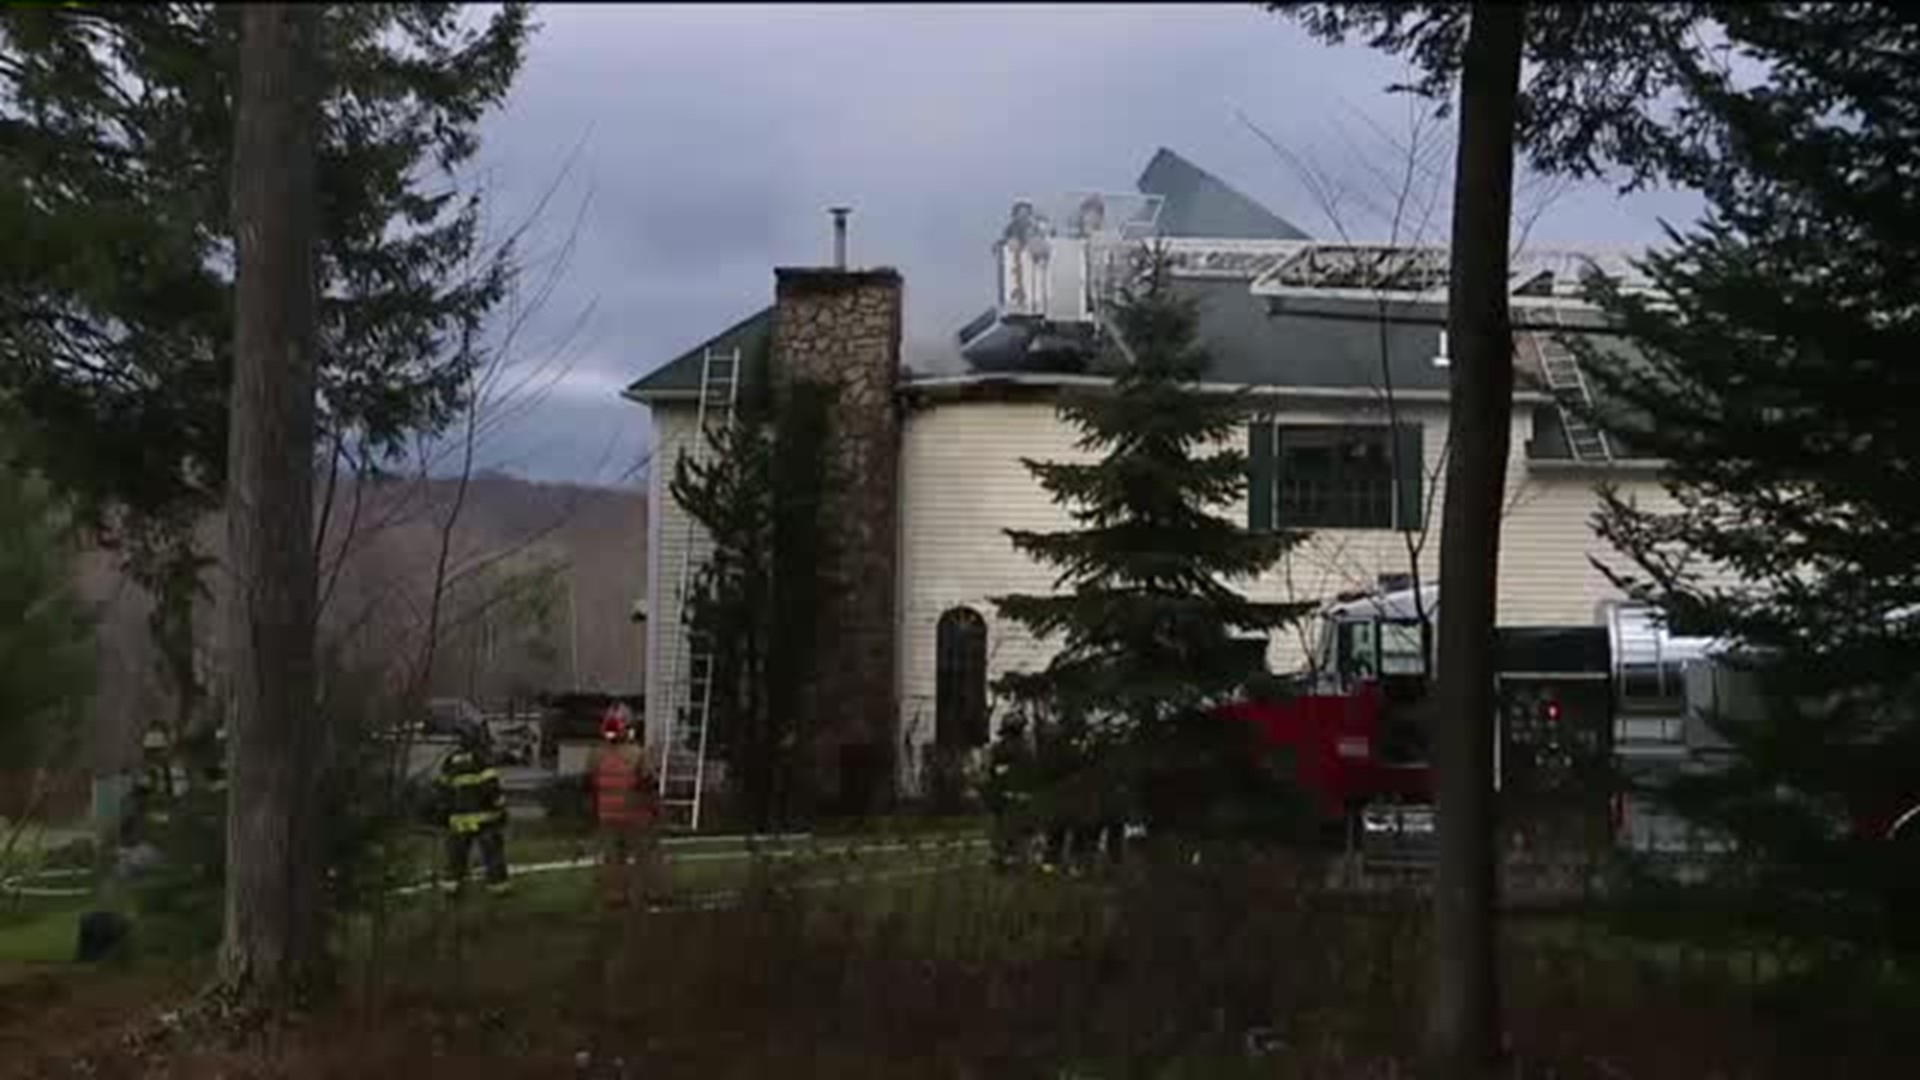 Home in Lackawanna County Damaged by Flames